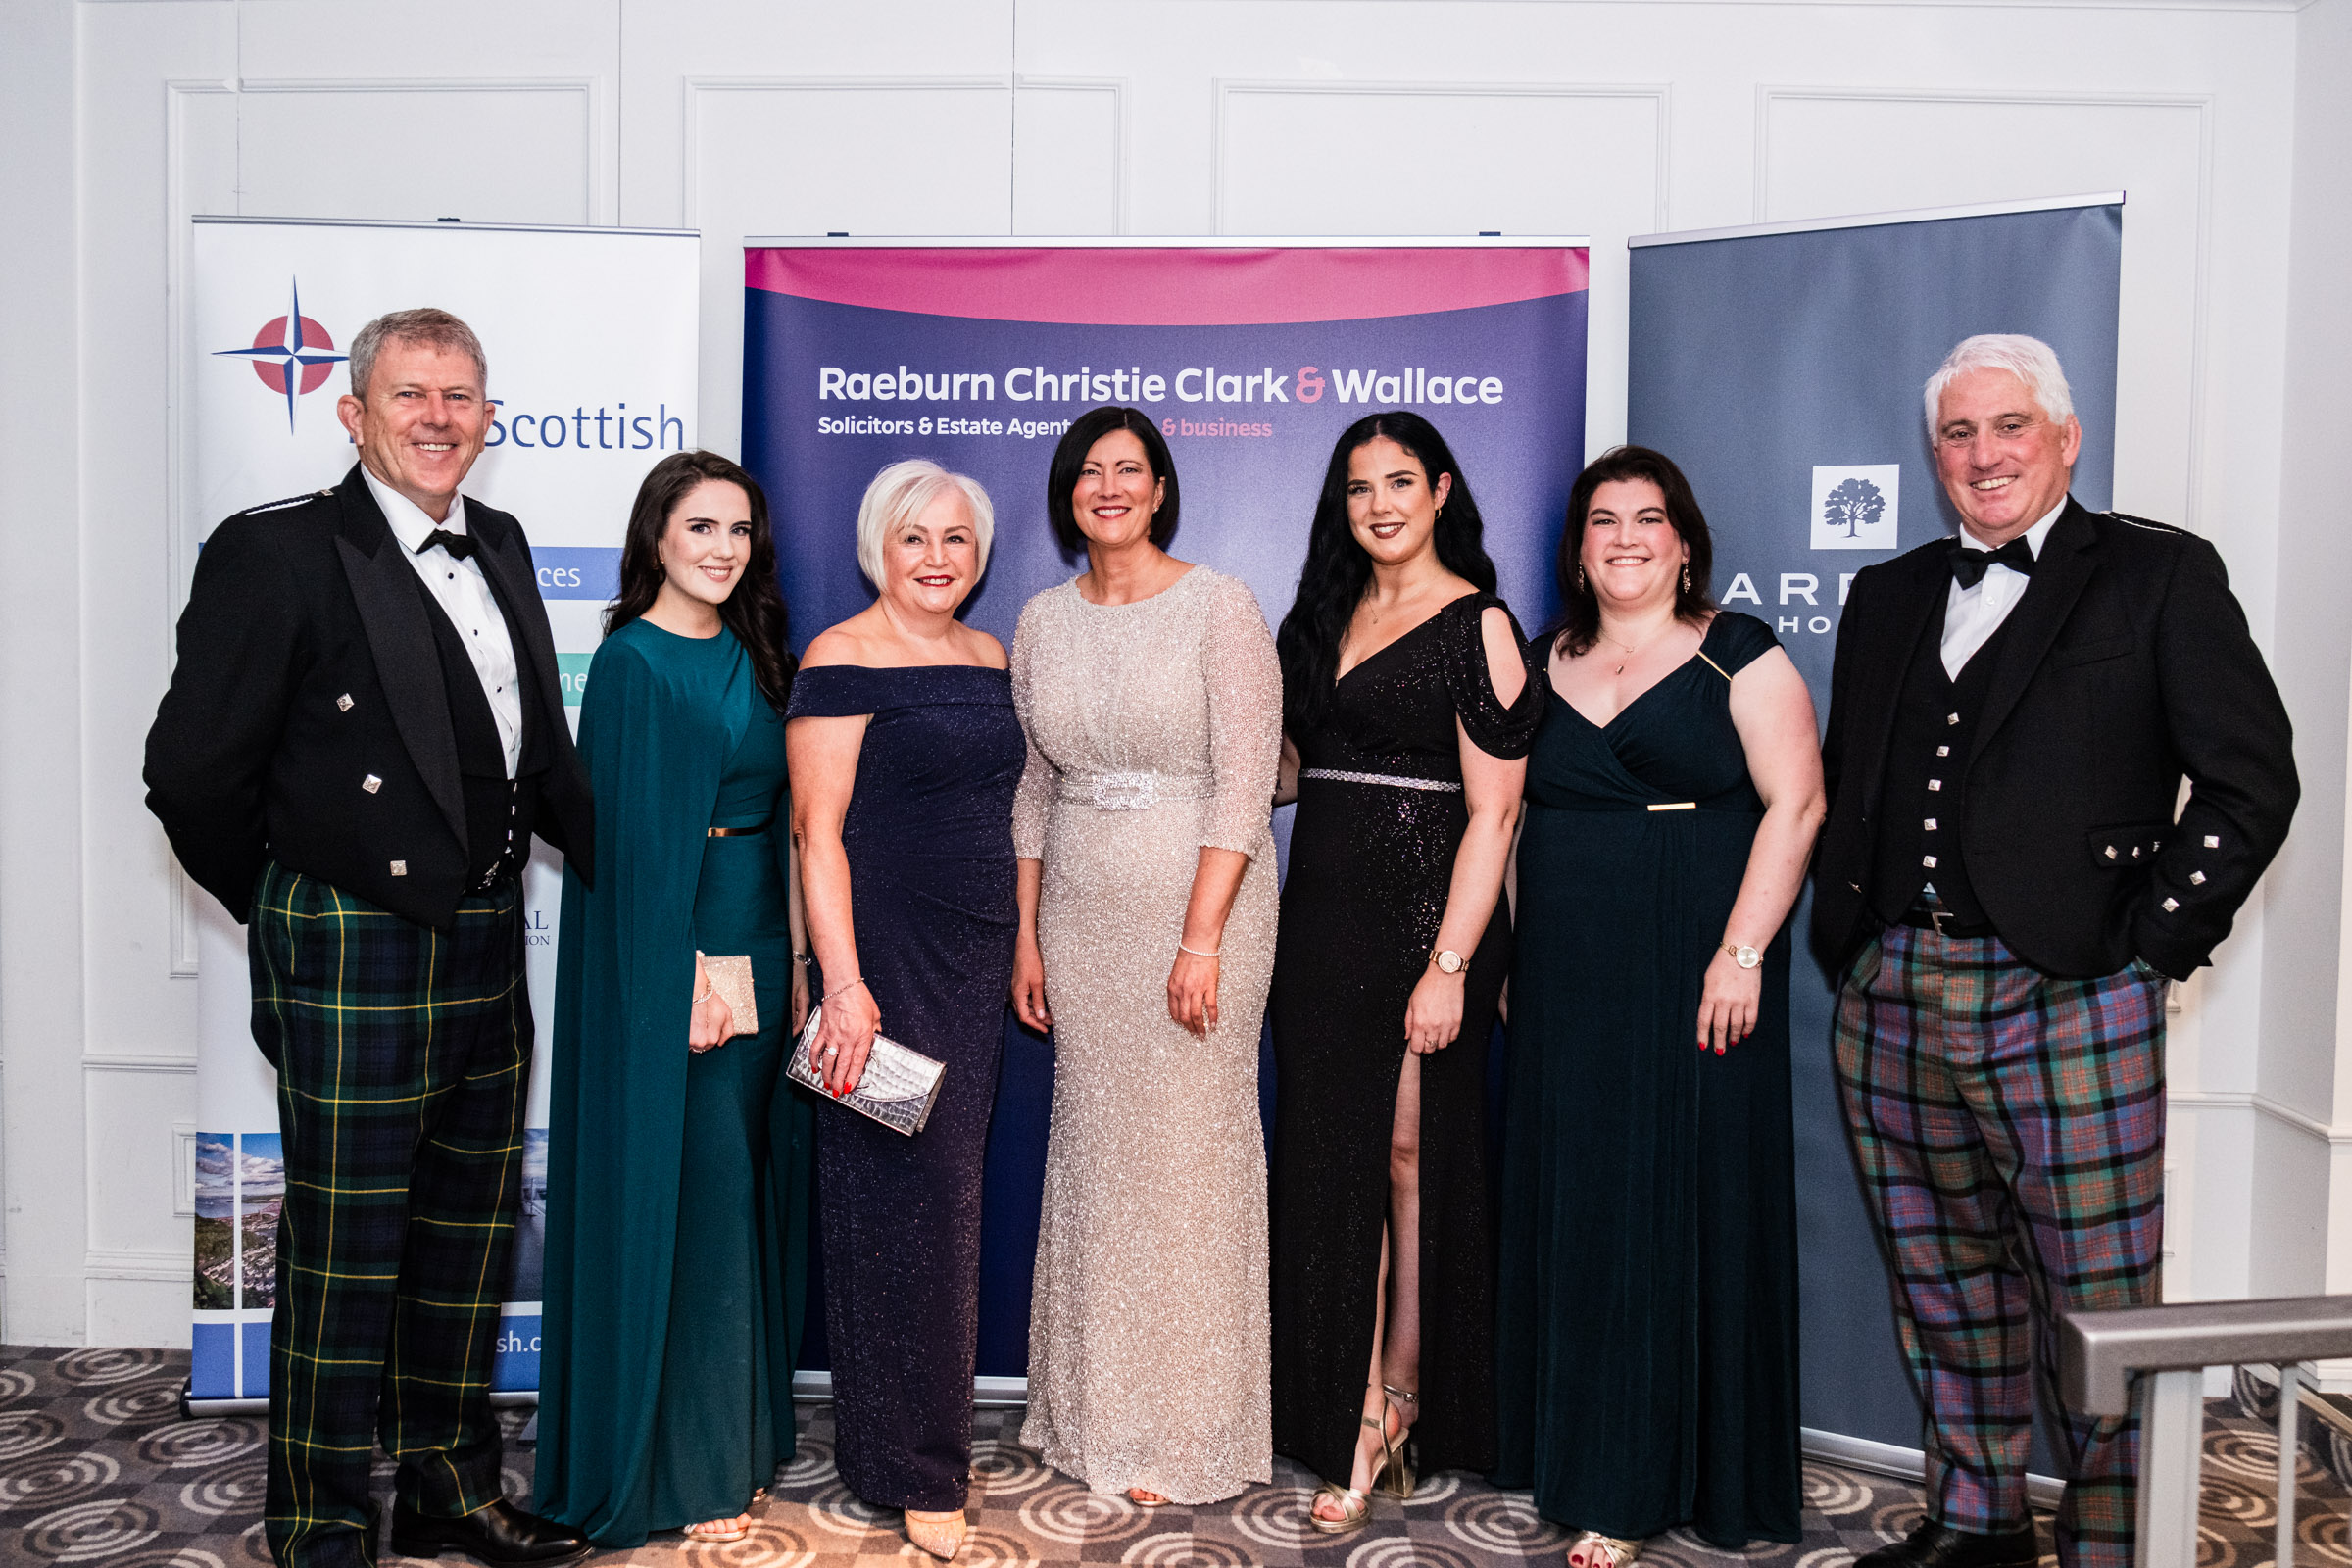 RCCW raises over £37,000 at charity ball